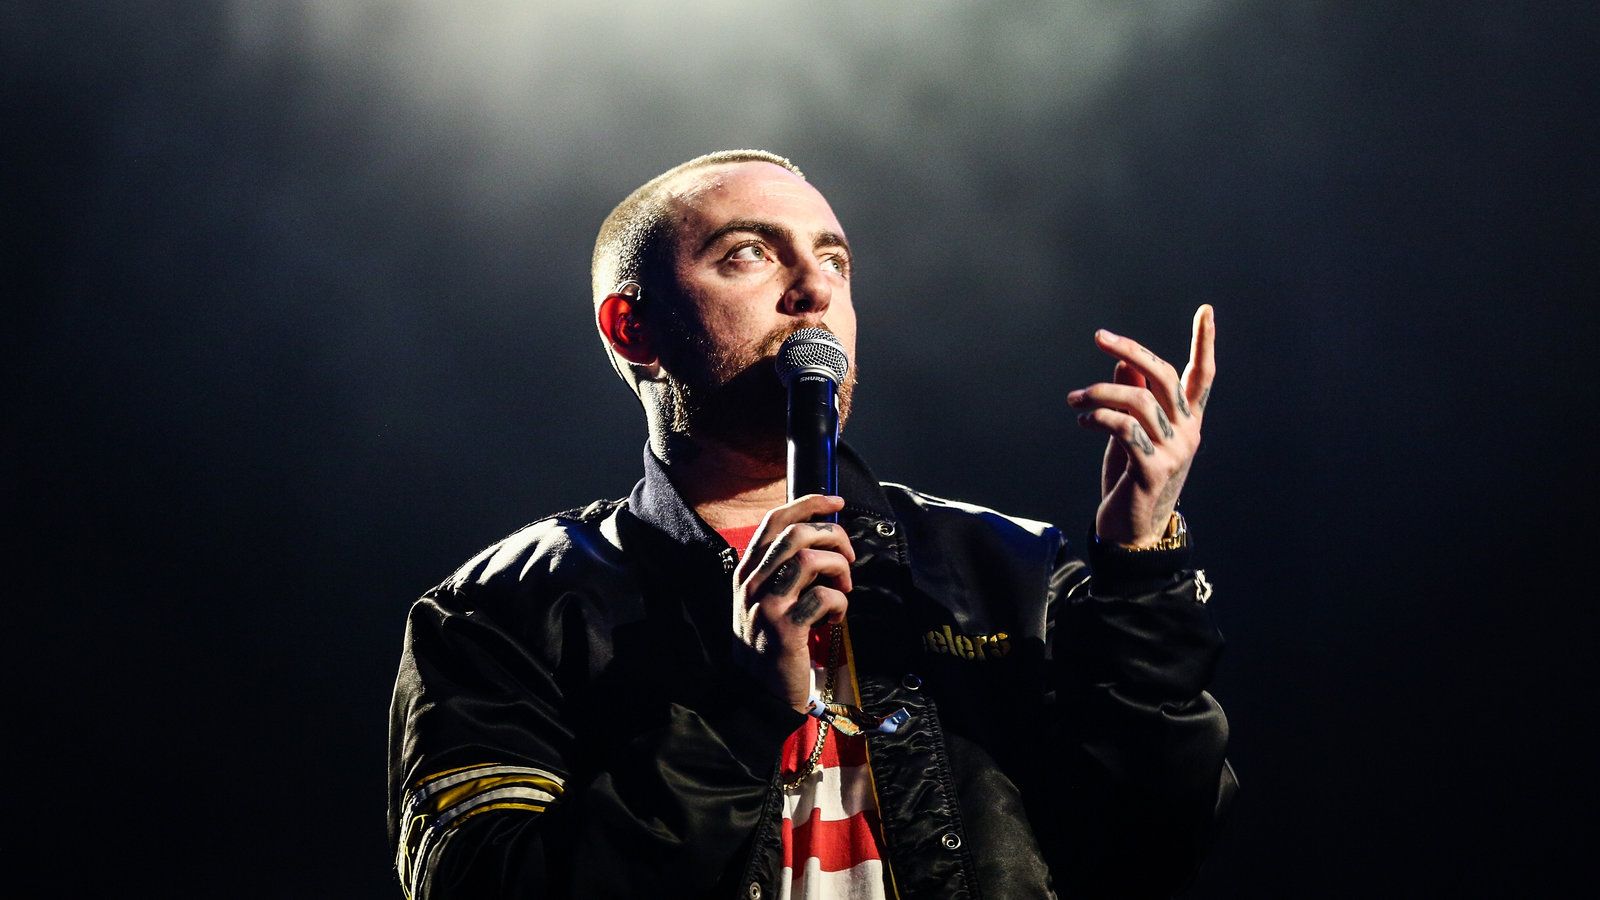 Mac Miller's Death Leads to Drug Charge Against California Man